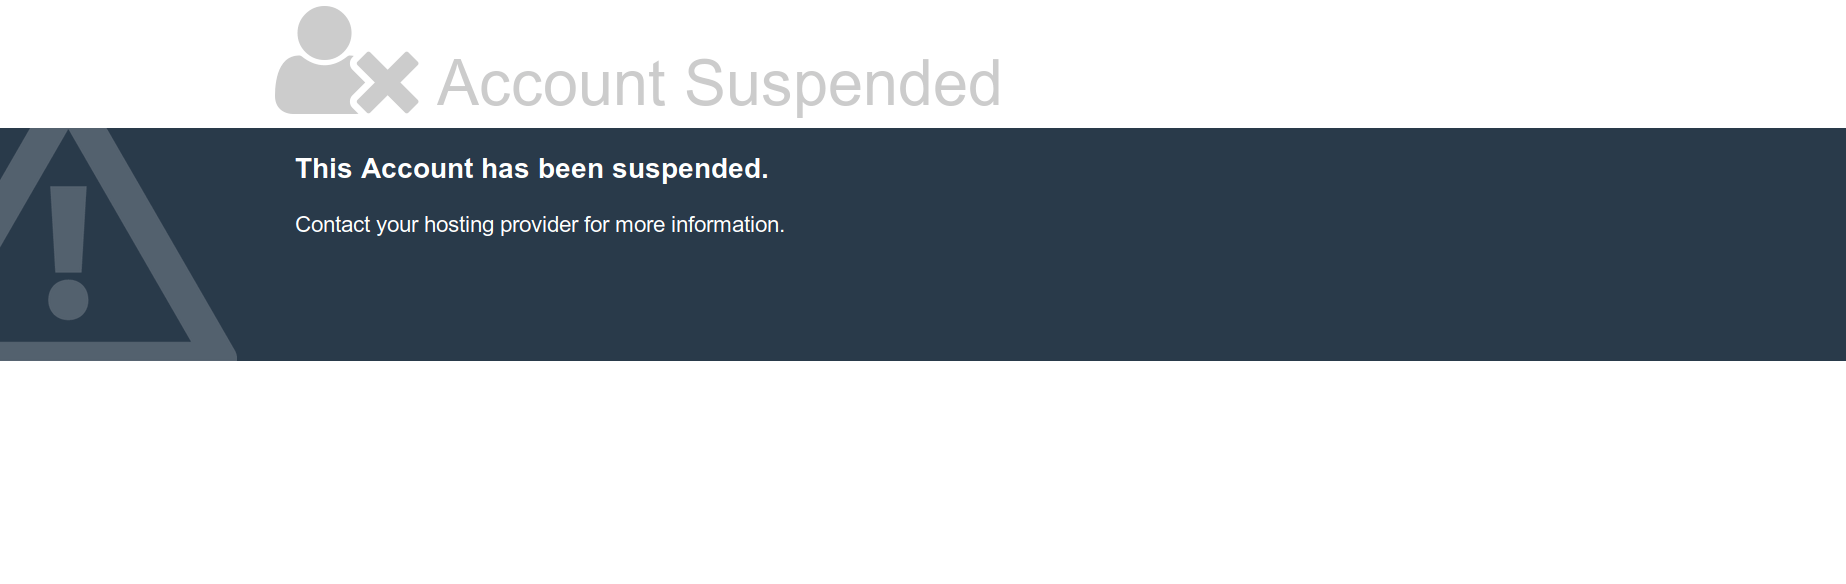 cPanel Account Suspended